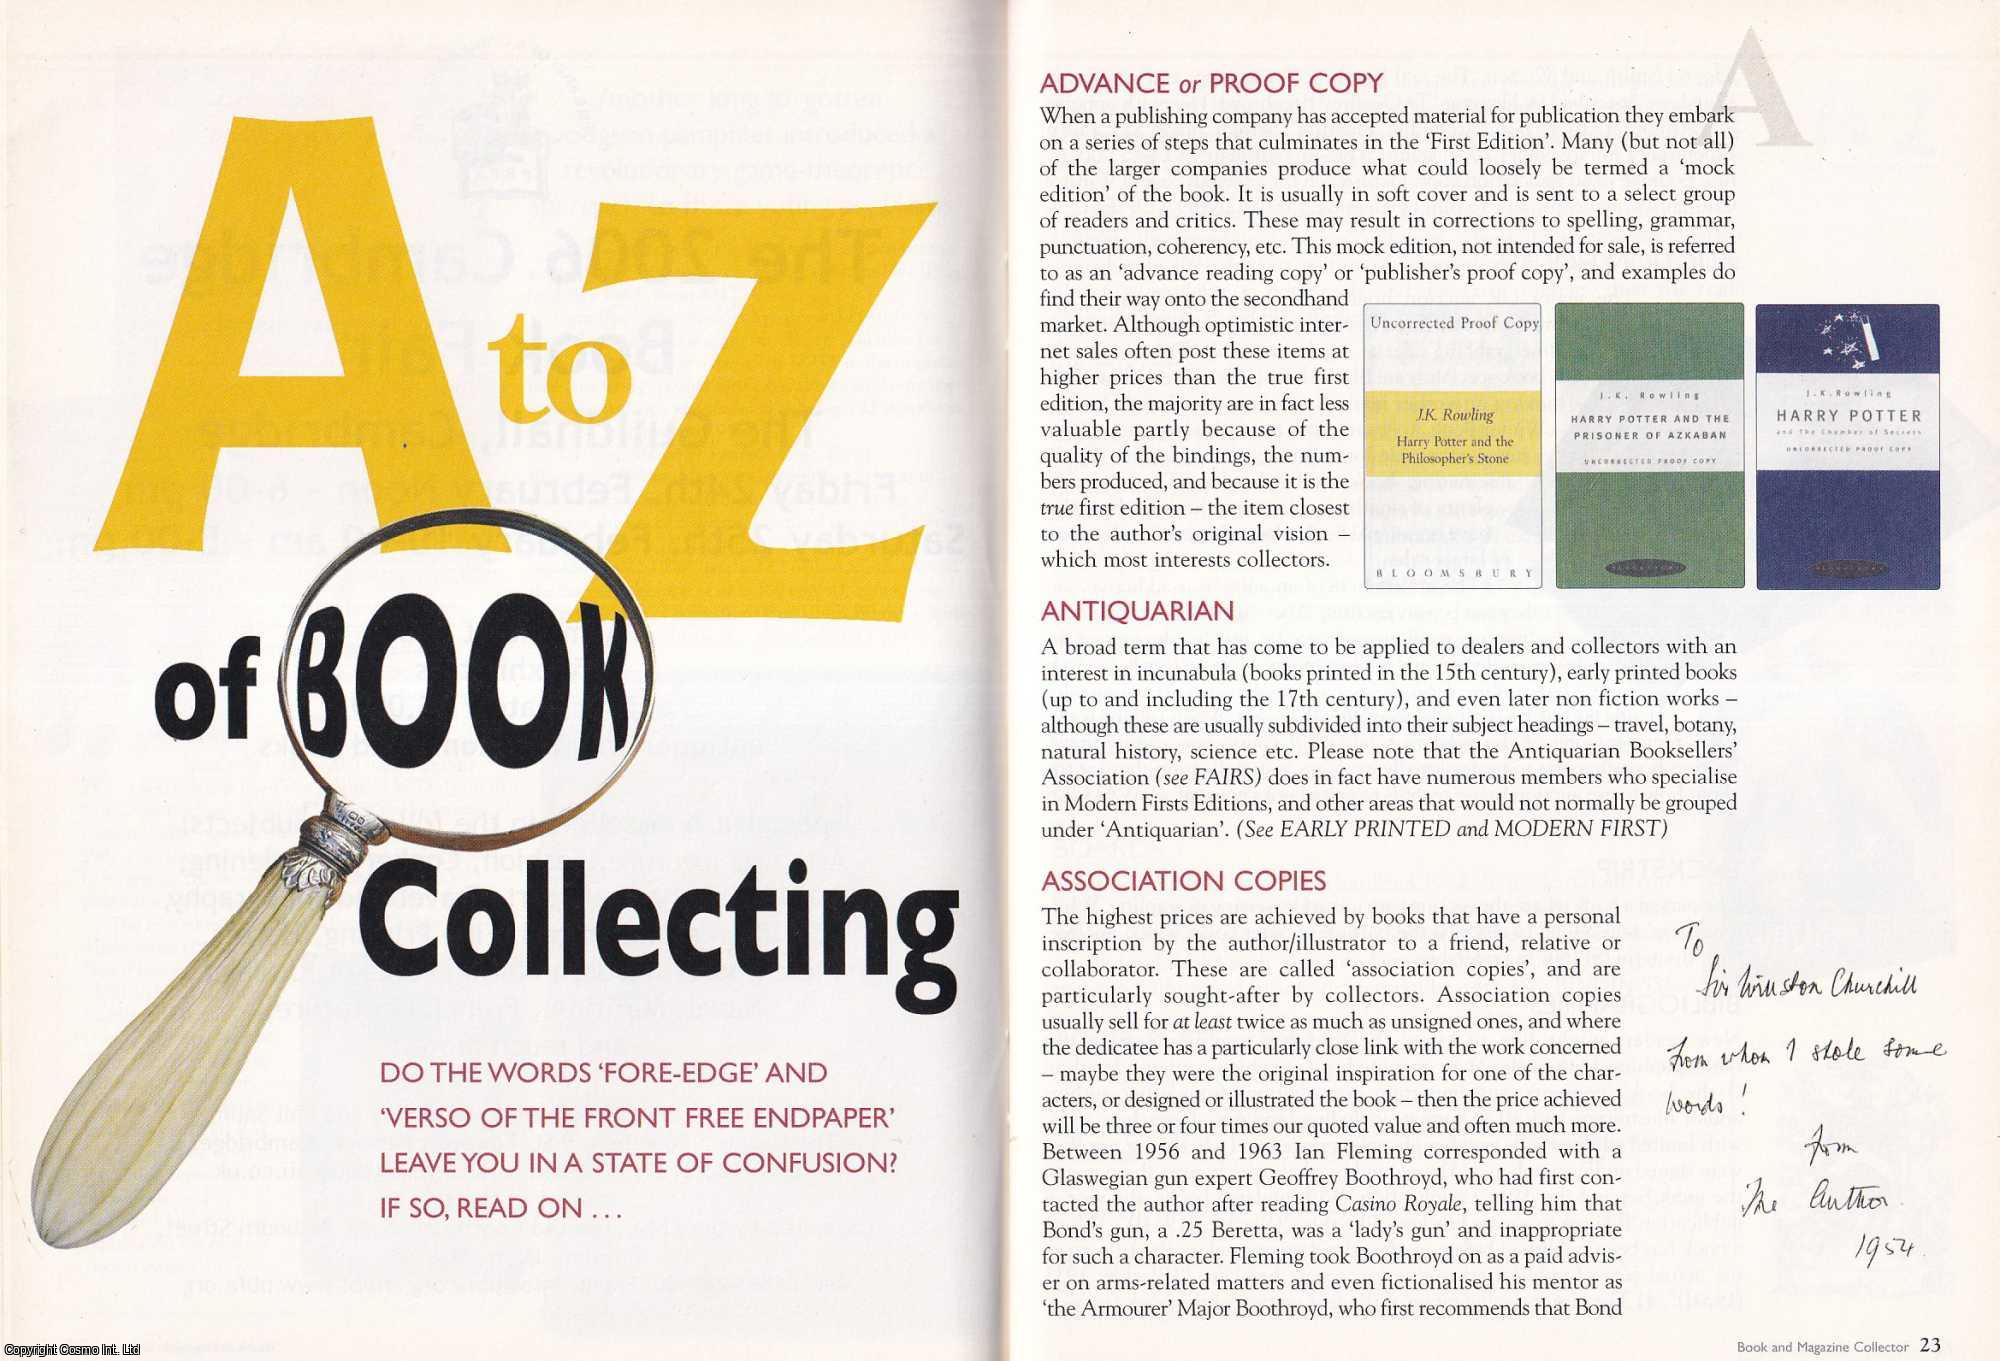 --- - A-Z of Book Collecting. This is an original article separated from an issue of The Book & Magazine Collector publication.